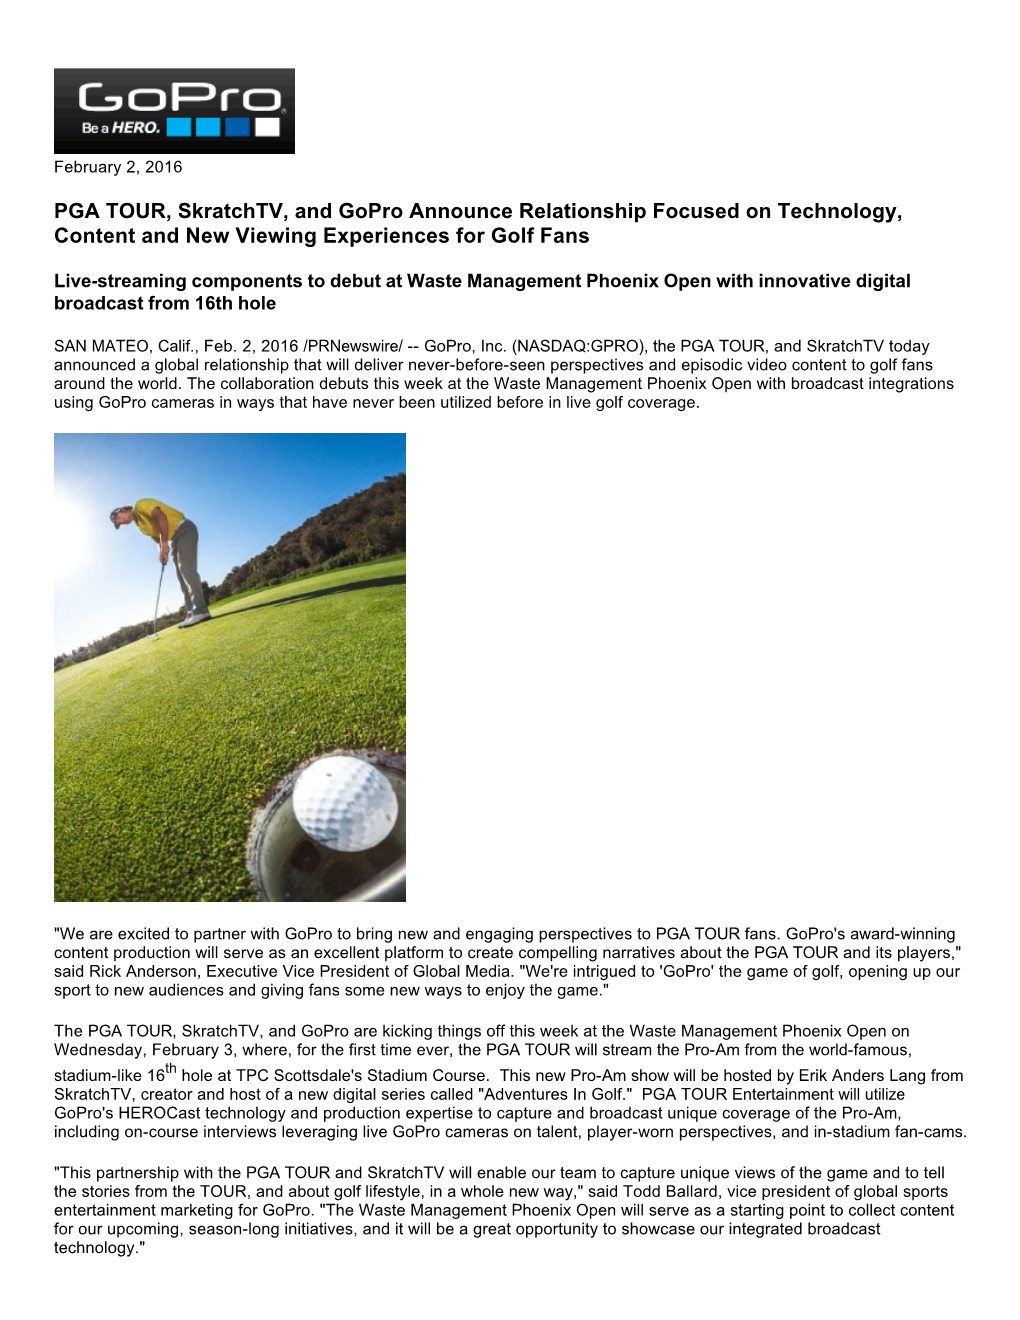 PGA TOUR, Skratchtv, and Gopro Announce Relationship Focused on Technology, Content and New Viewing Experiences for Golf Fans